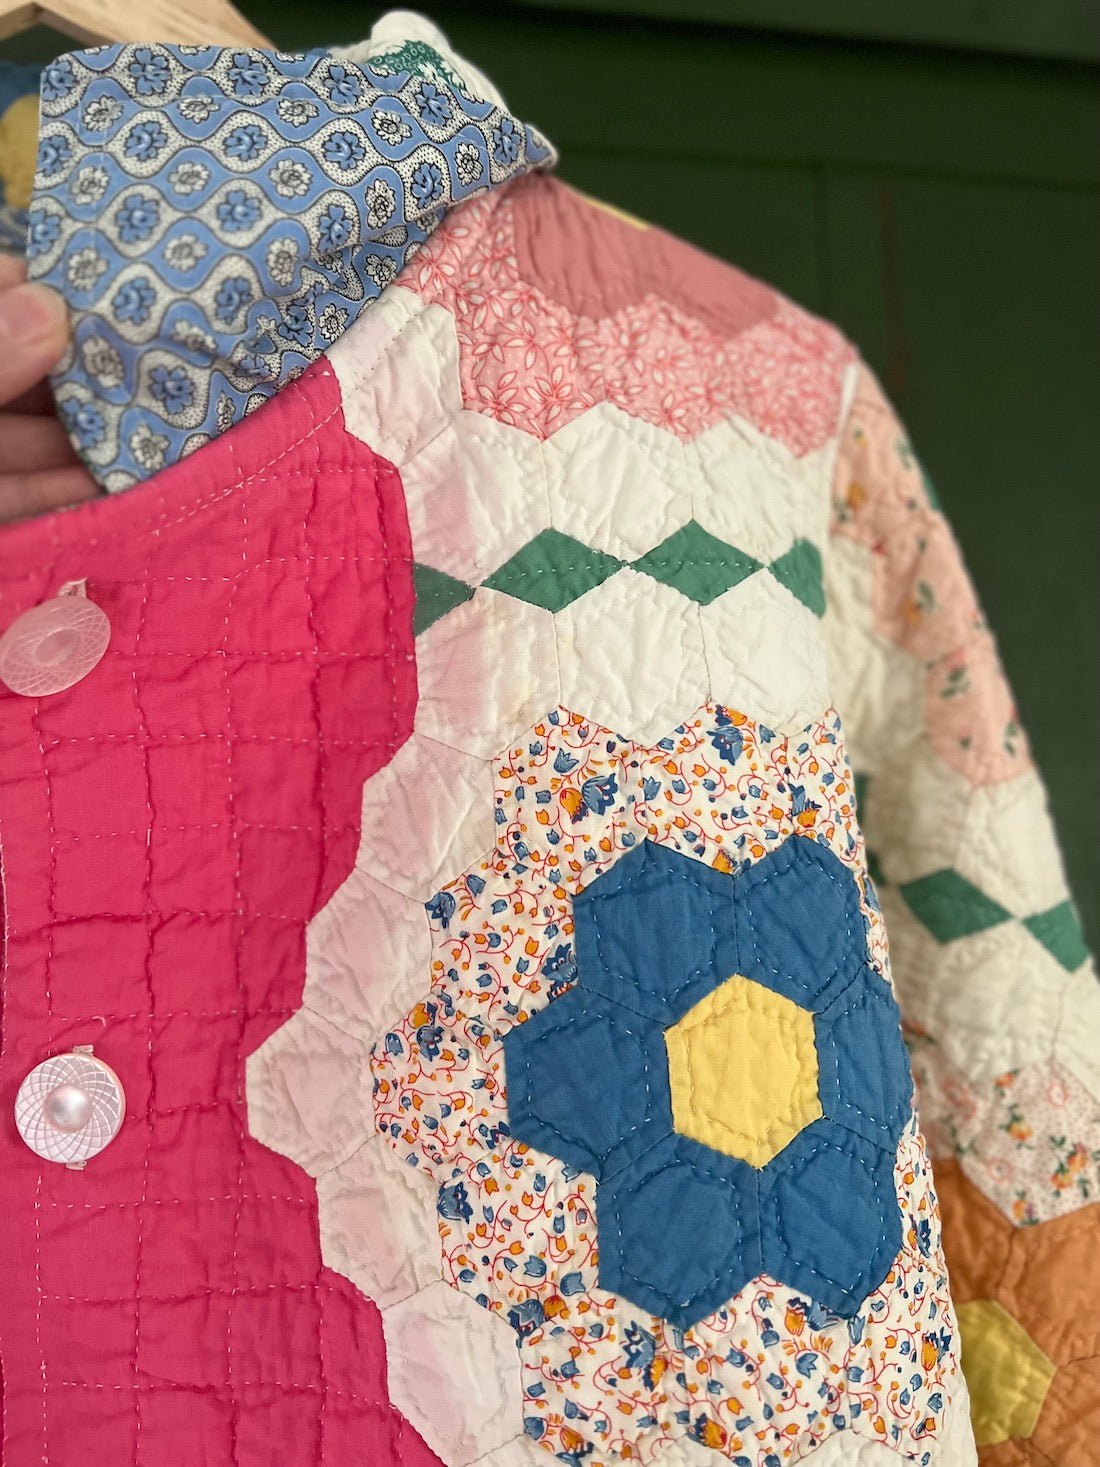 Ditsy Floral and Ikat Print Quilted Jacket in LENZING™ ECOVERO™ Orange